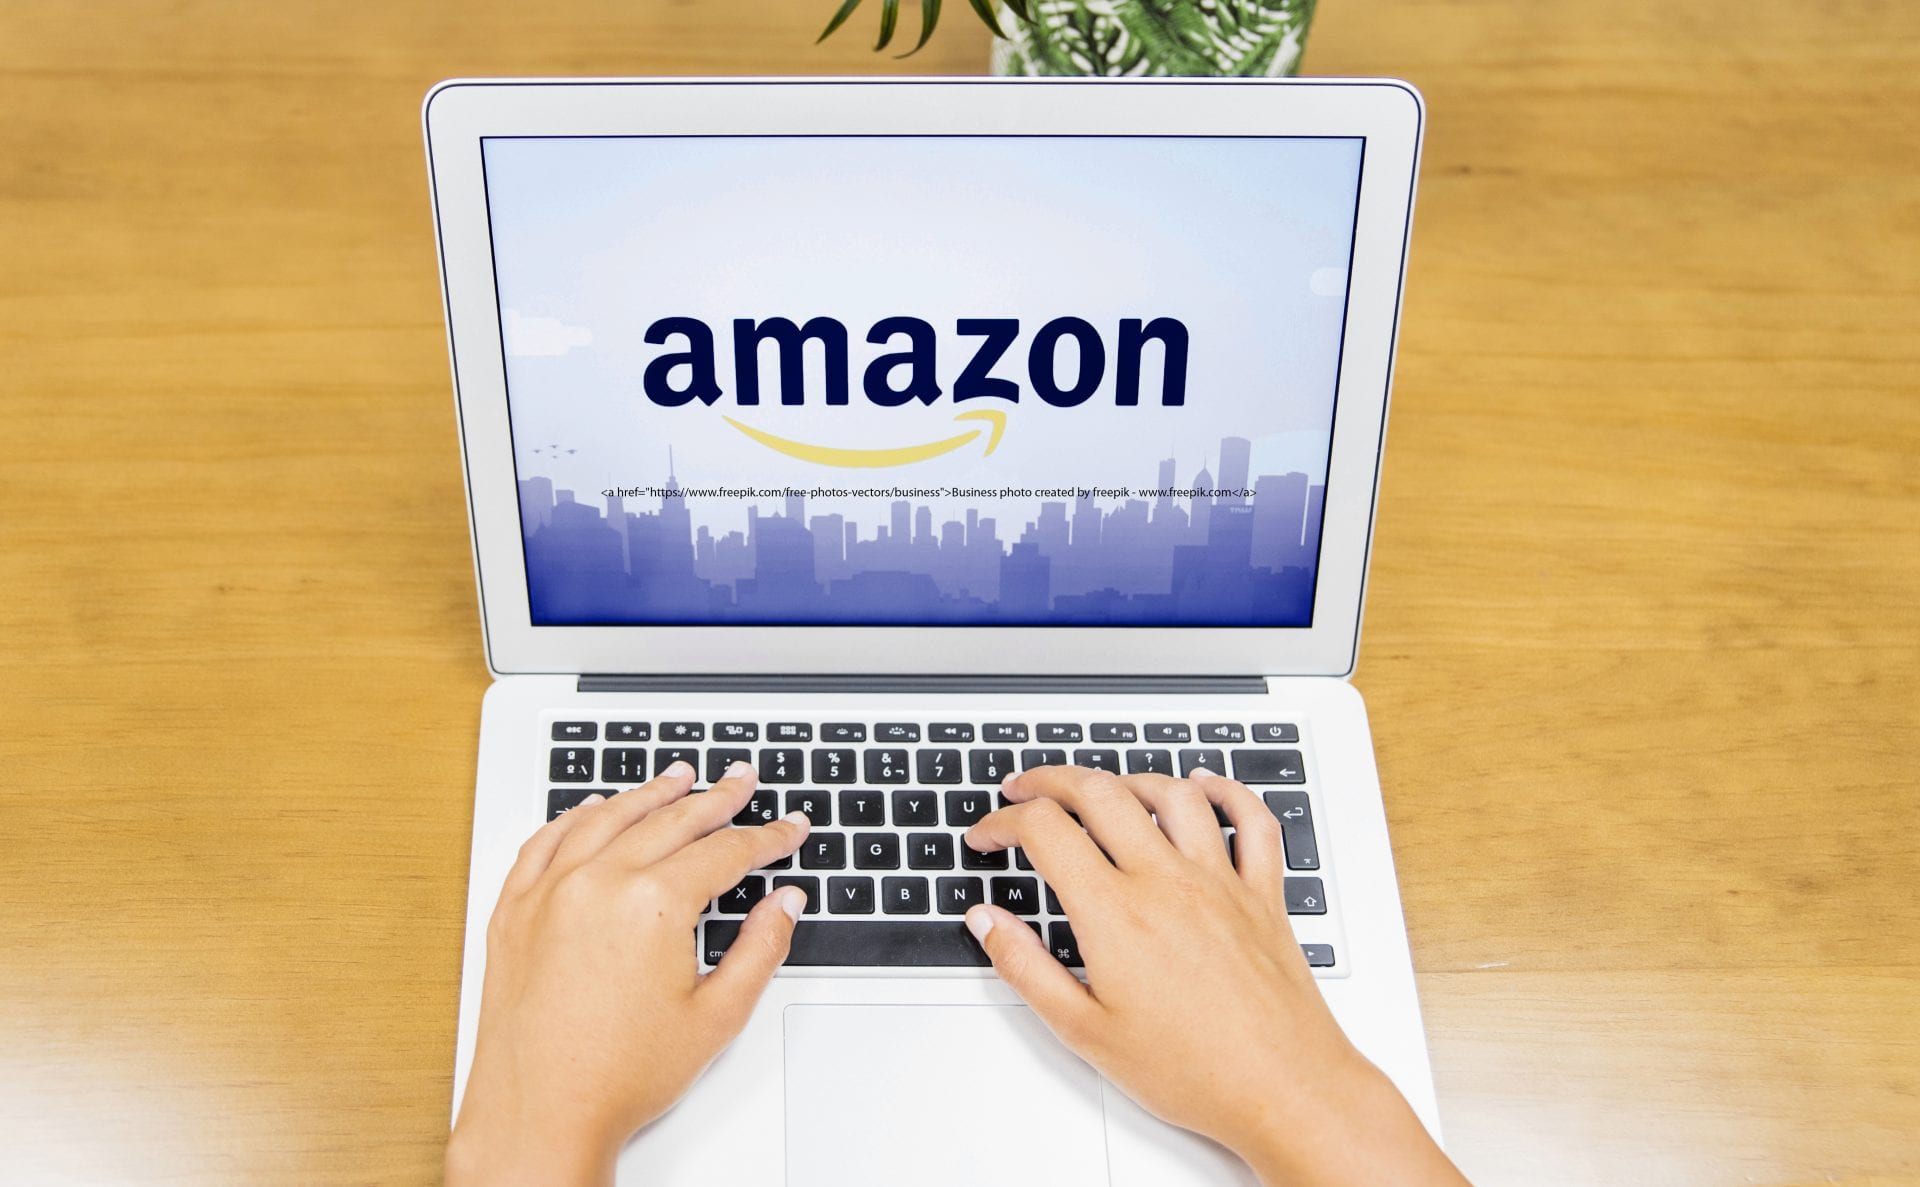 How to Find Who You Follow on Amazon? 5 Easy Steps